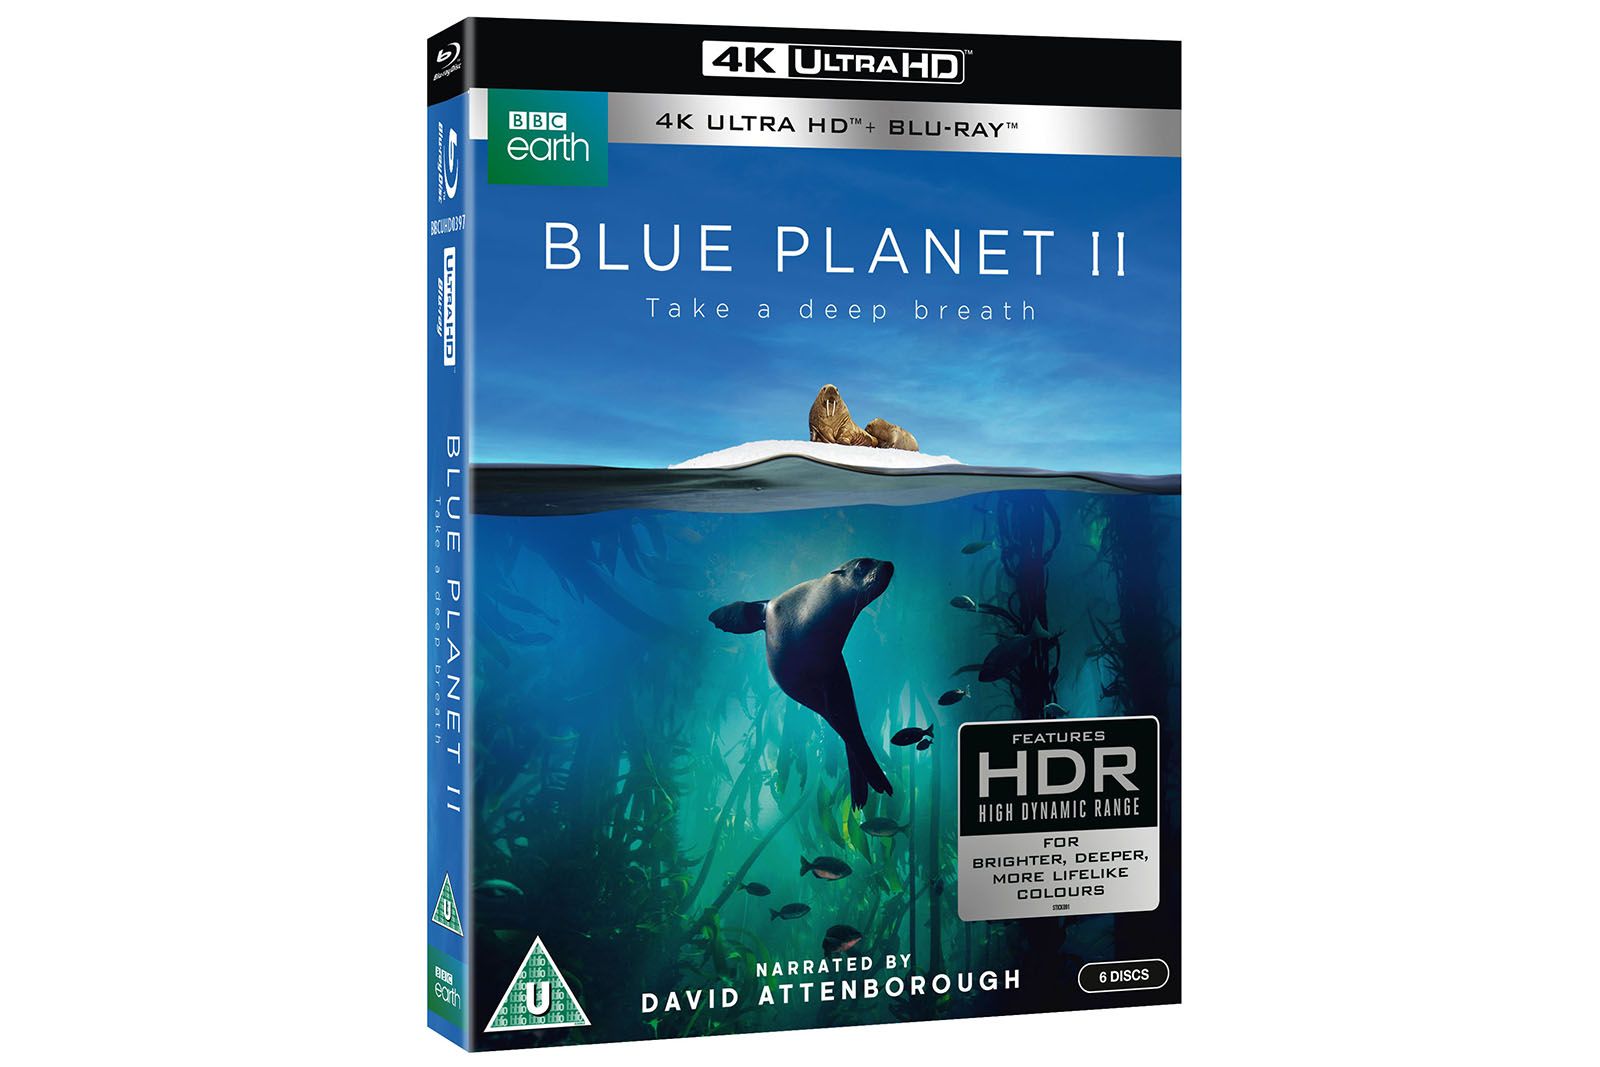 Now You Can Watch Blue Planet Ii In 4k Hdr Even Without A Hlg Tv image 2